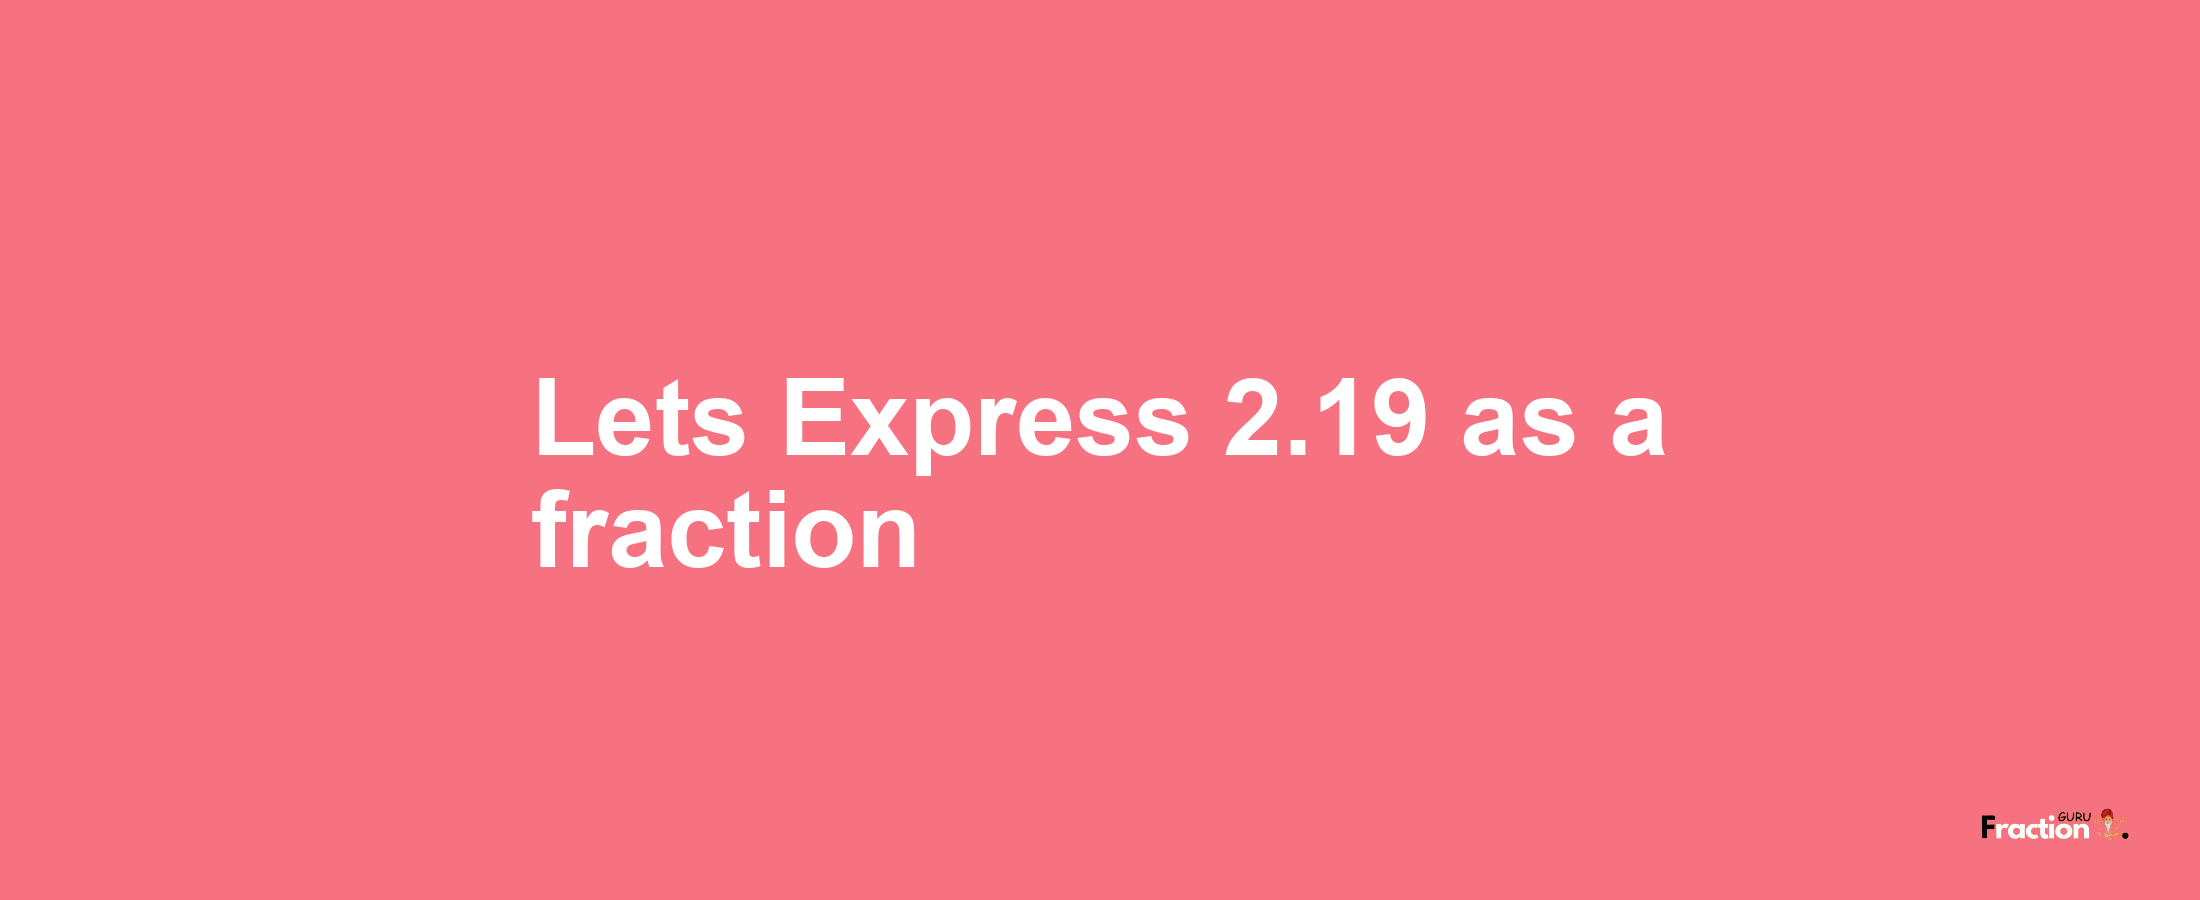 Lets Express 2.19 as afraction